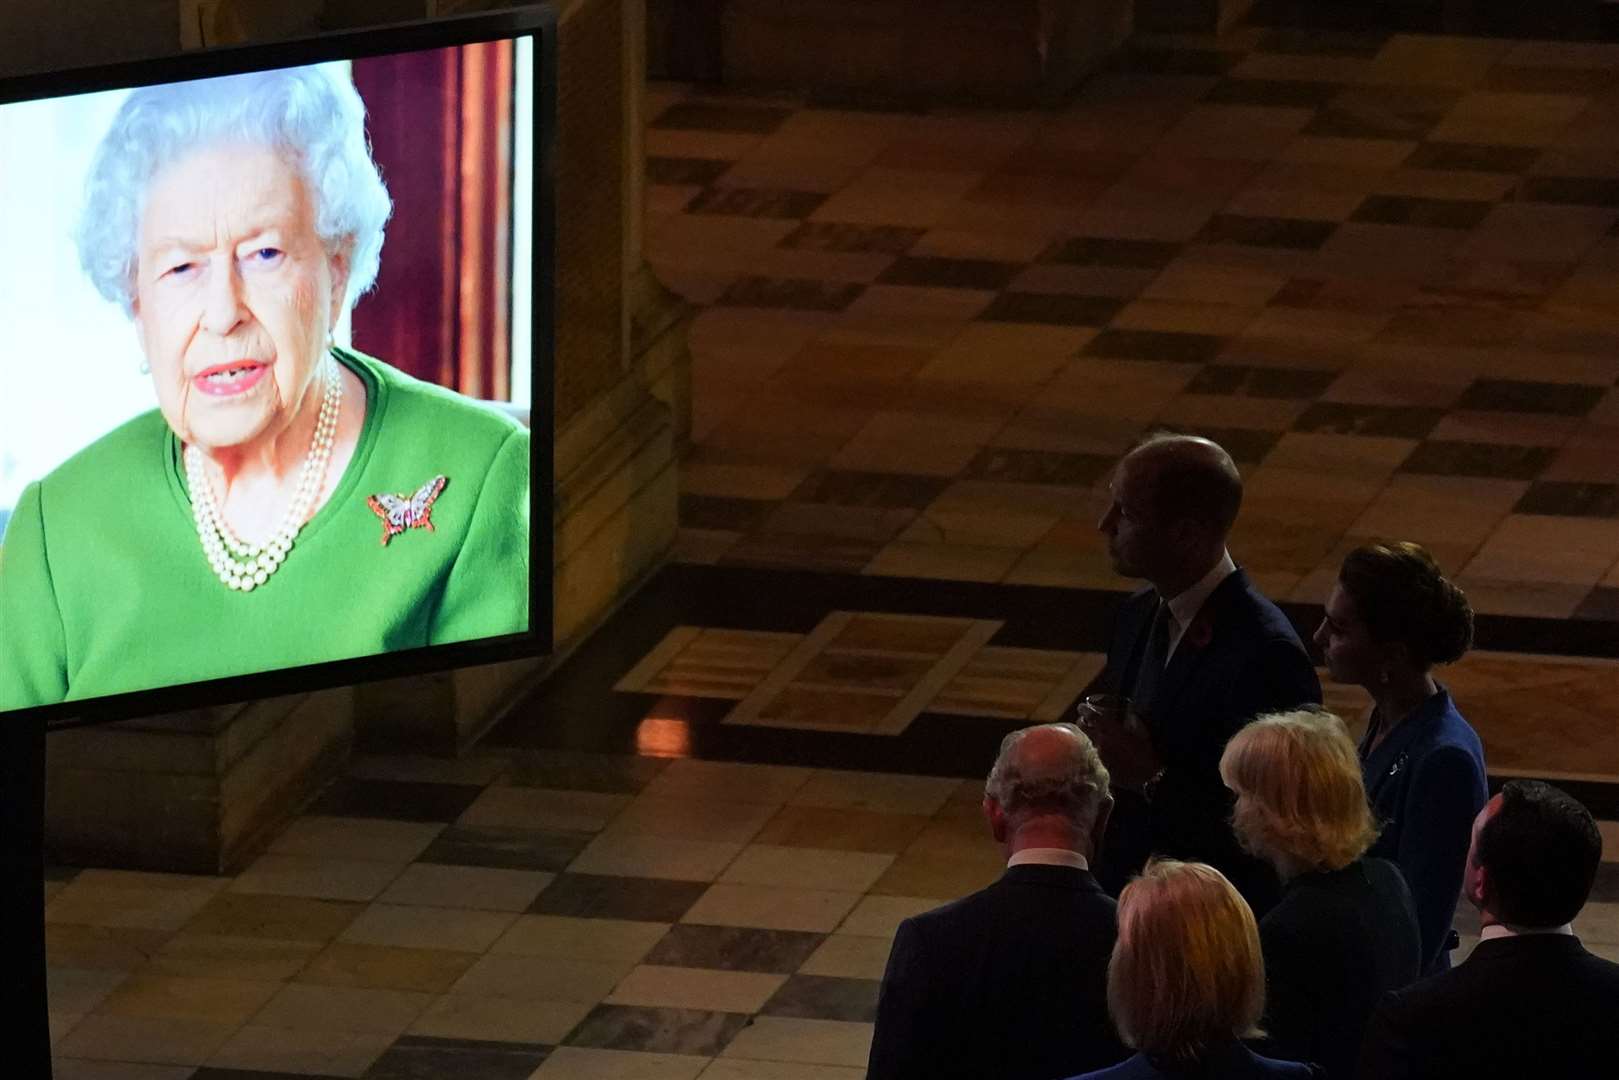 The Prince of Wales and the Duchess of Cornwall with the Duke and Duchess of Cambridge watching the Queen’s Cop26 video message (Alberto Pezzali/PA)